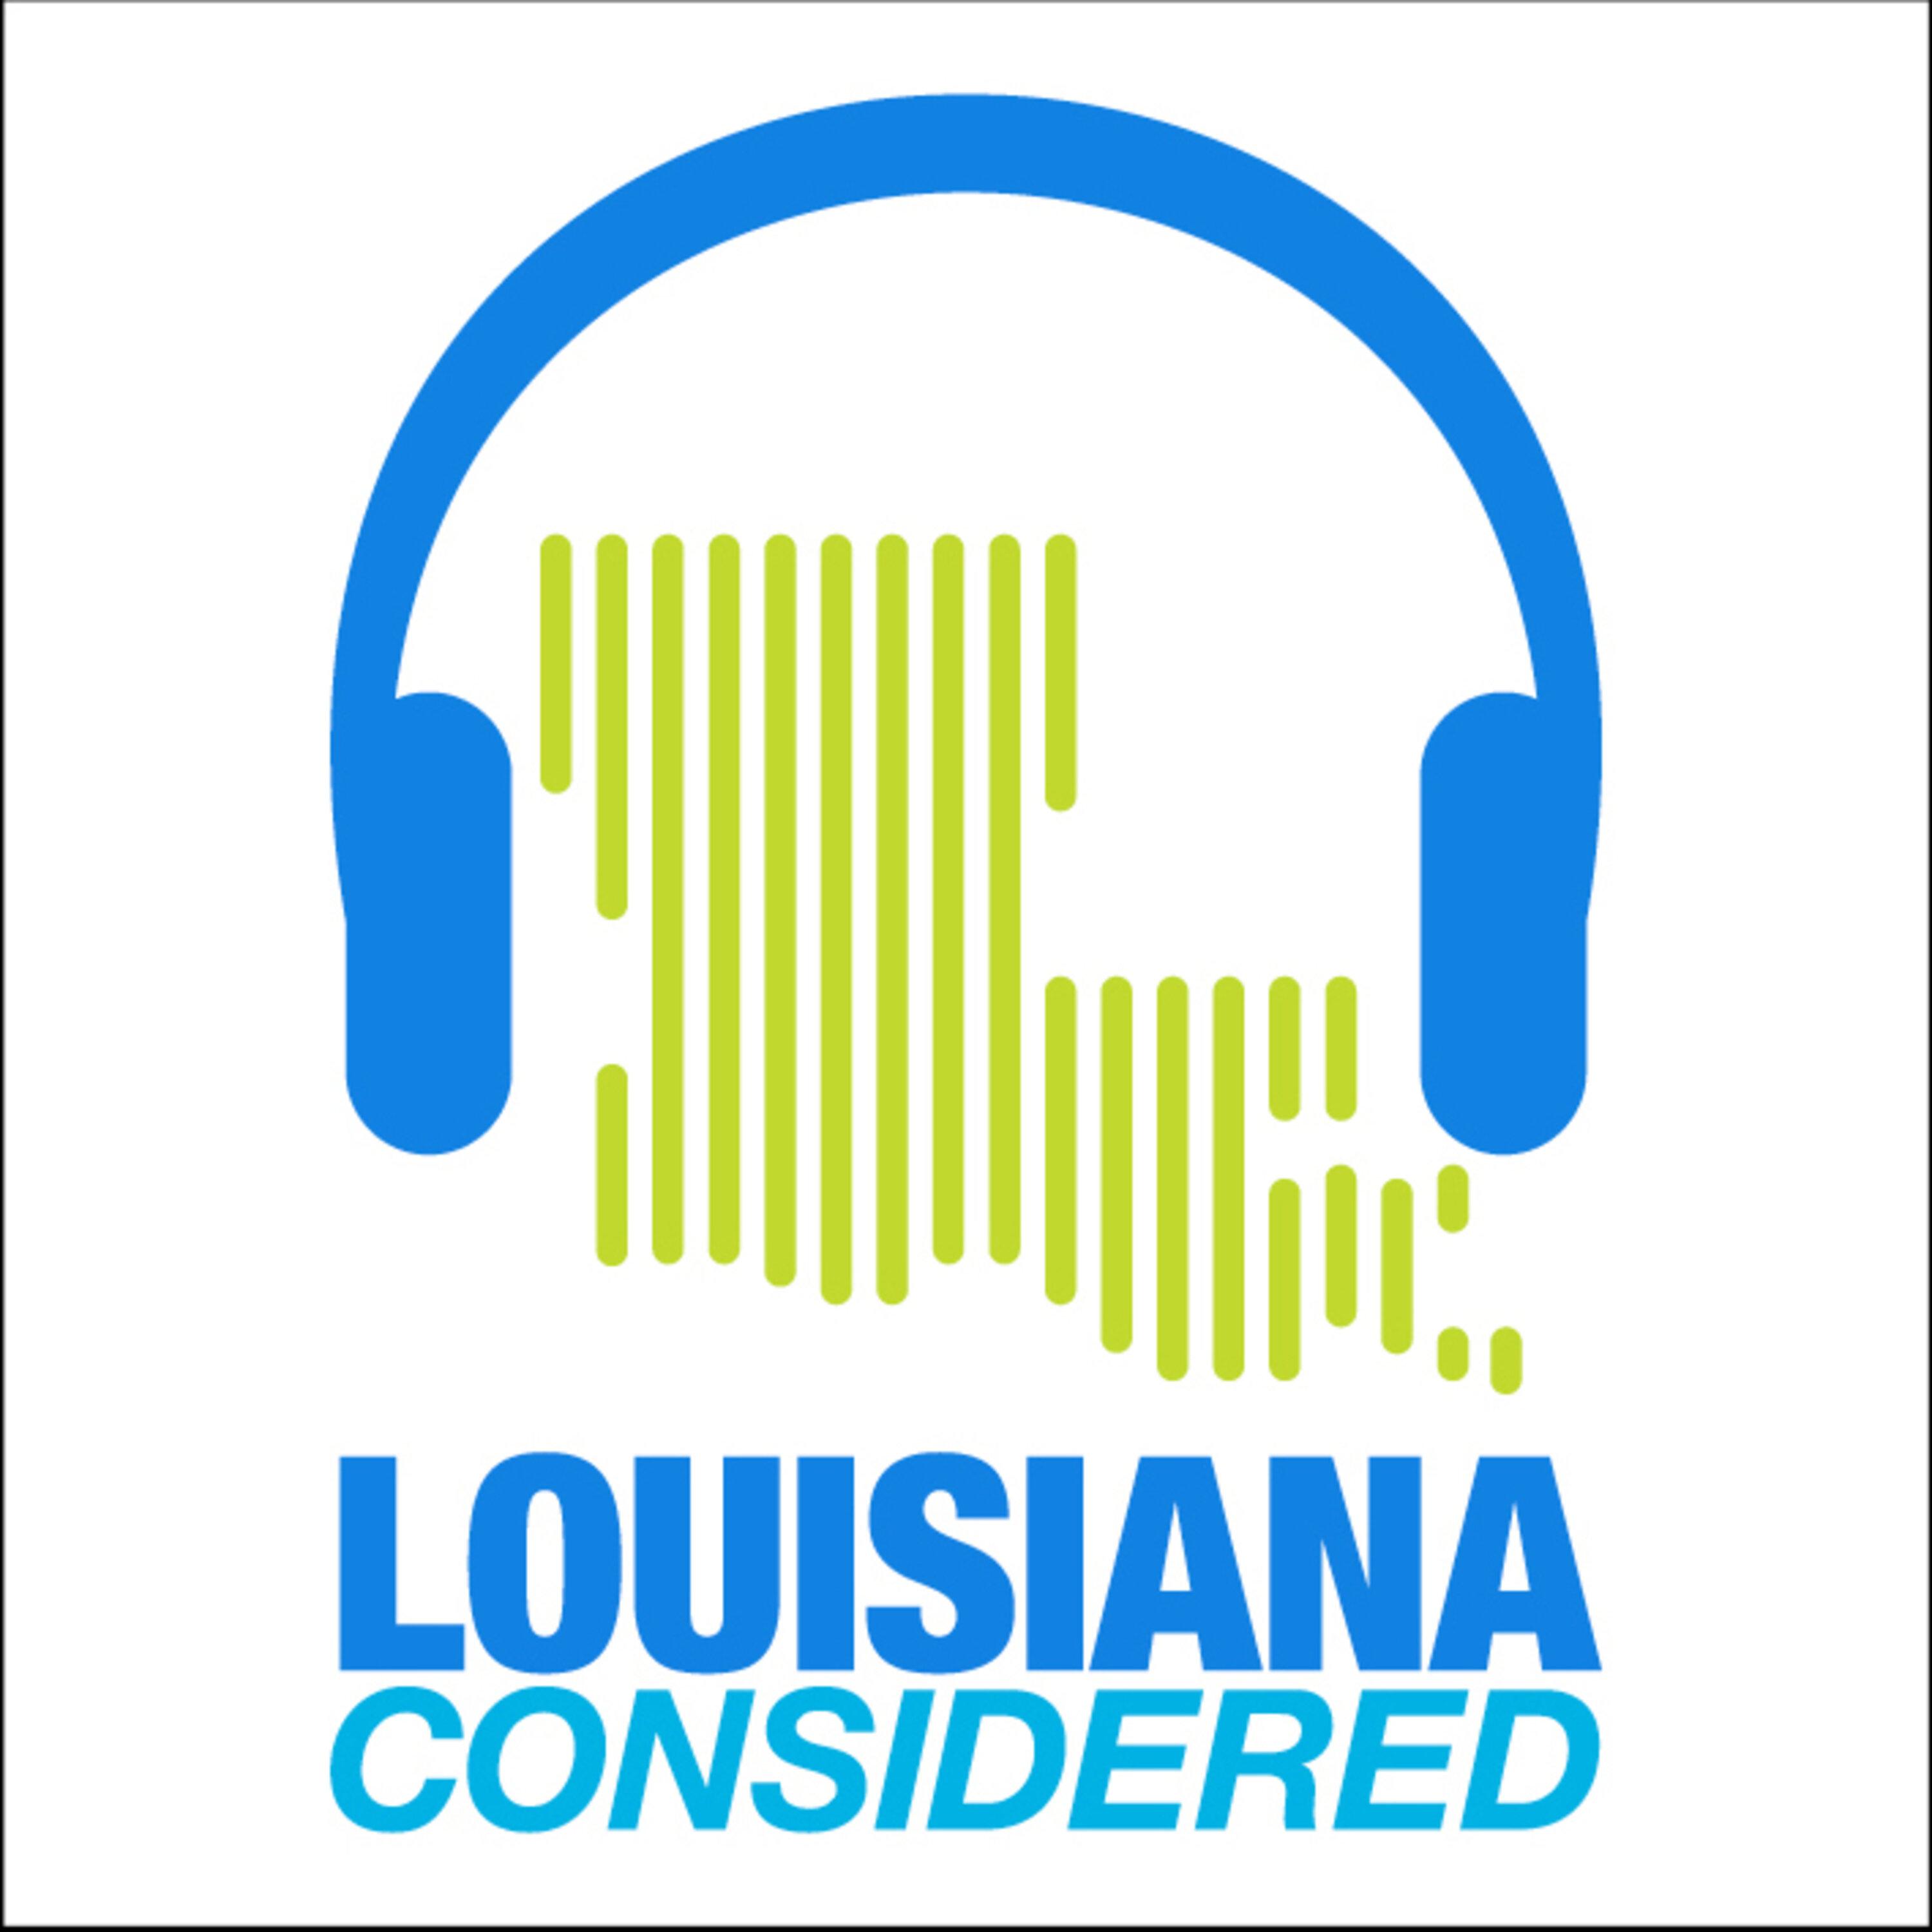 Thumbnail for "Louisiana Considered: Tomorrow’s Veto Override Session, Industrial Construction Project Threatens A Historic Black Community, The Rediscovered Recordings Of Jazz Fest 1970".